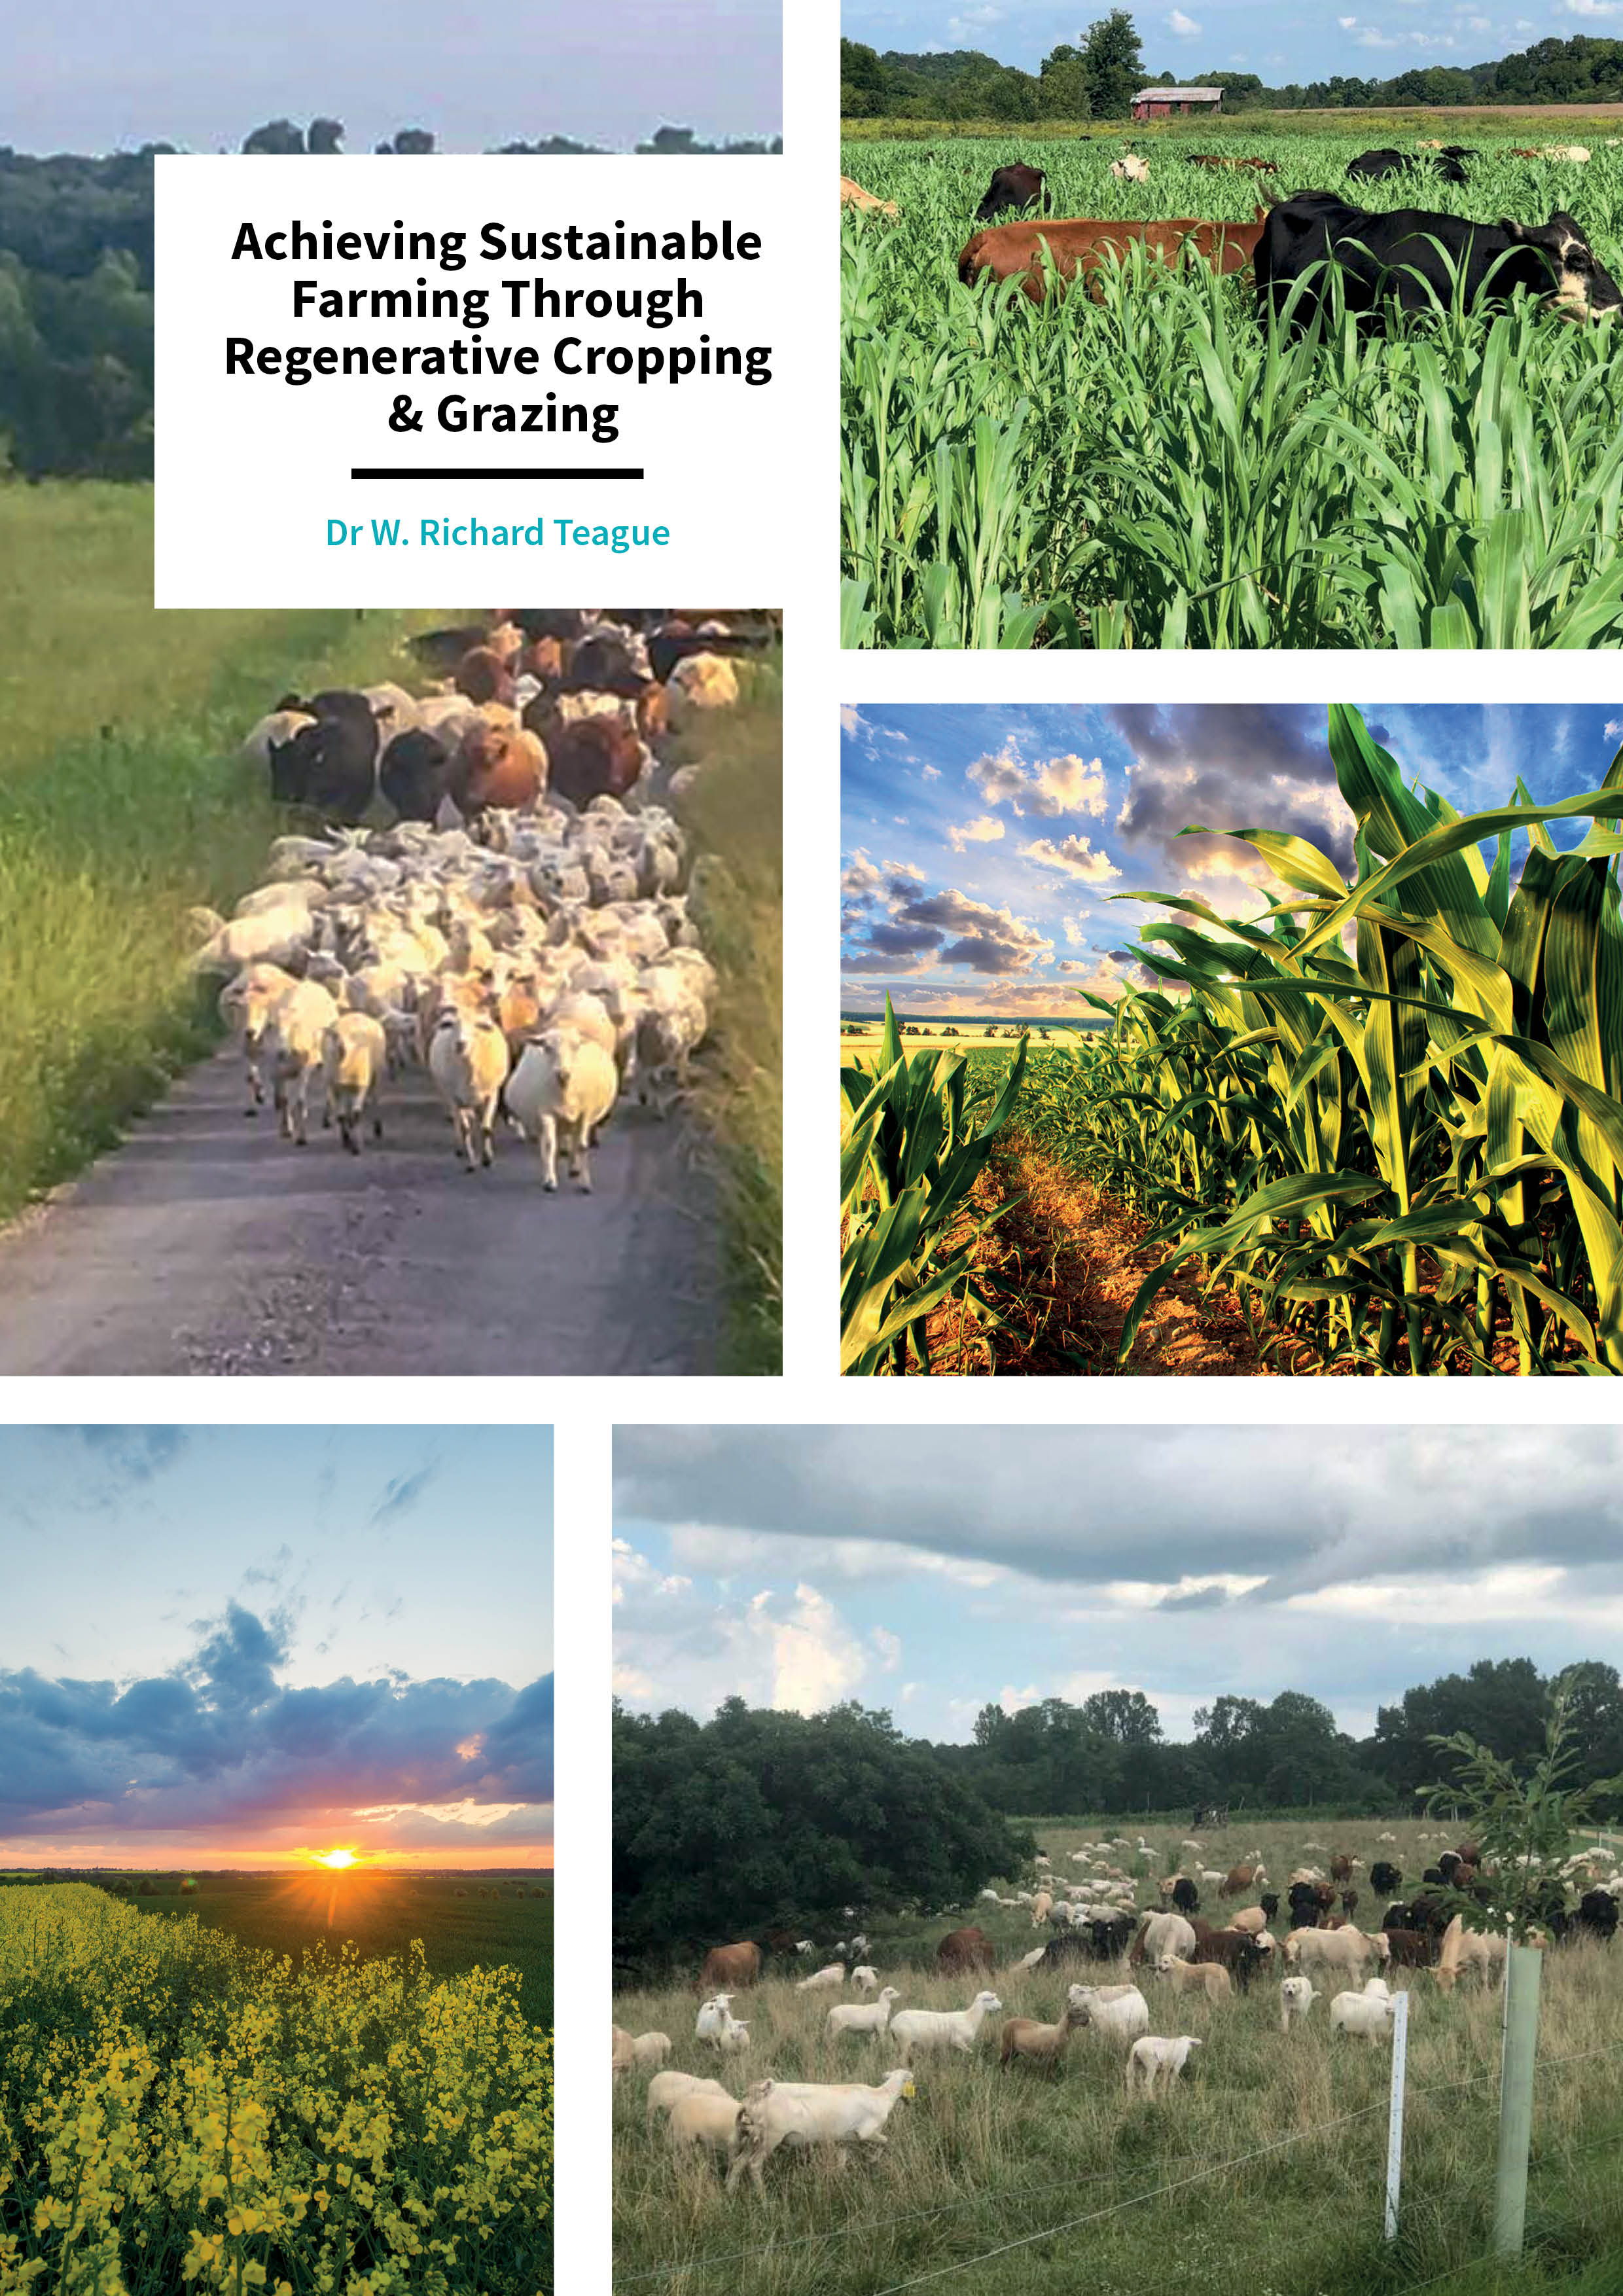 Dr Richard Teague – Achieving Sustainable Farming Through Regenerative Cropping & Grazing